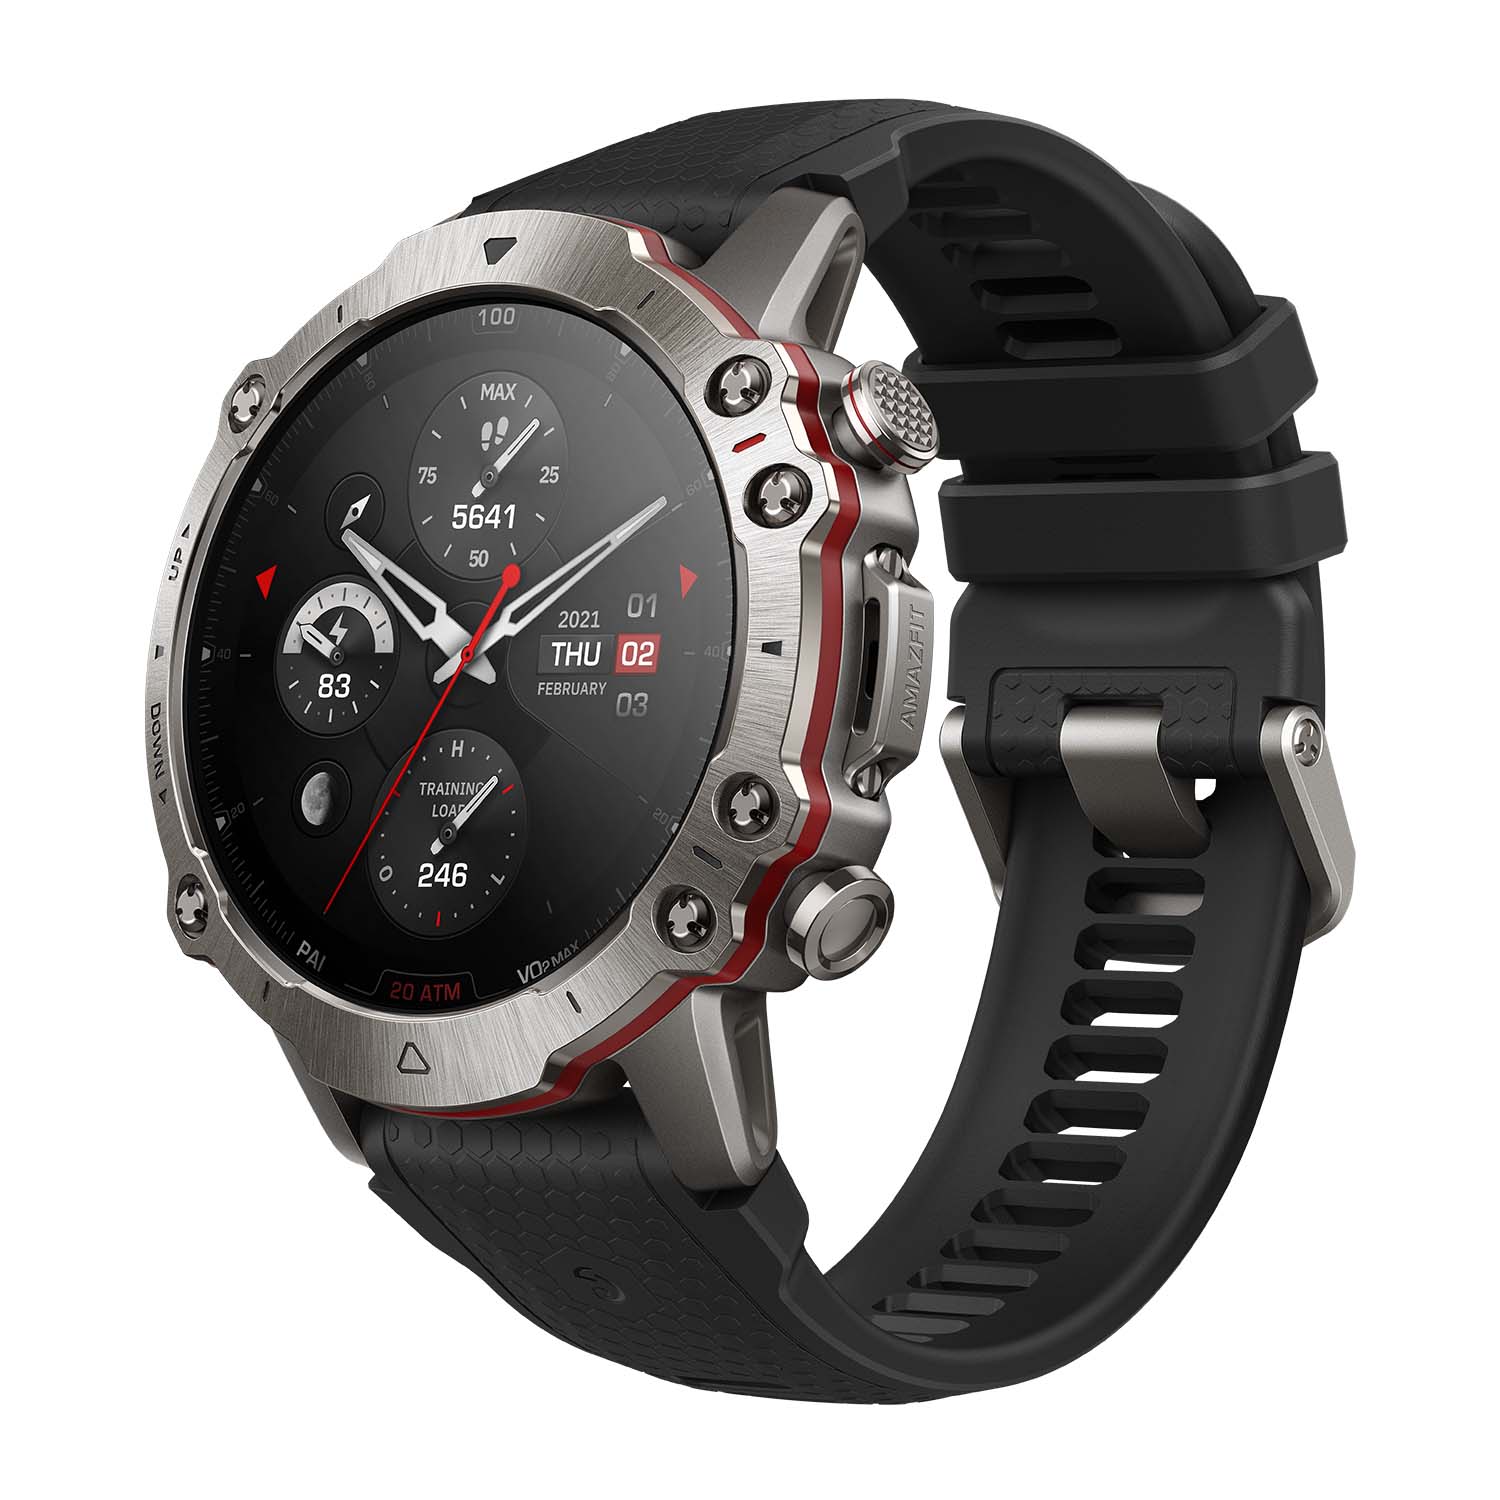 Amazfit Cheetah Pro review: A Garmin Forerunner Lite with more